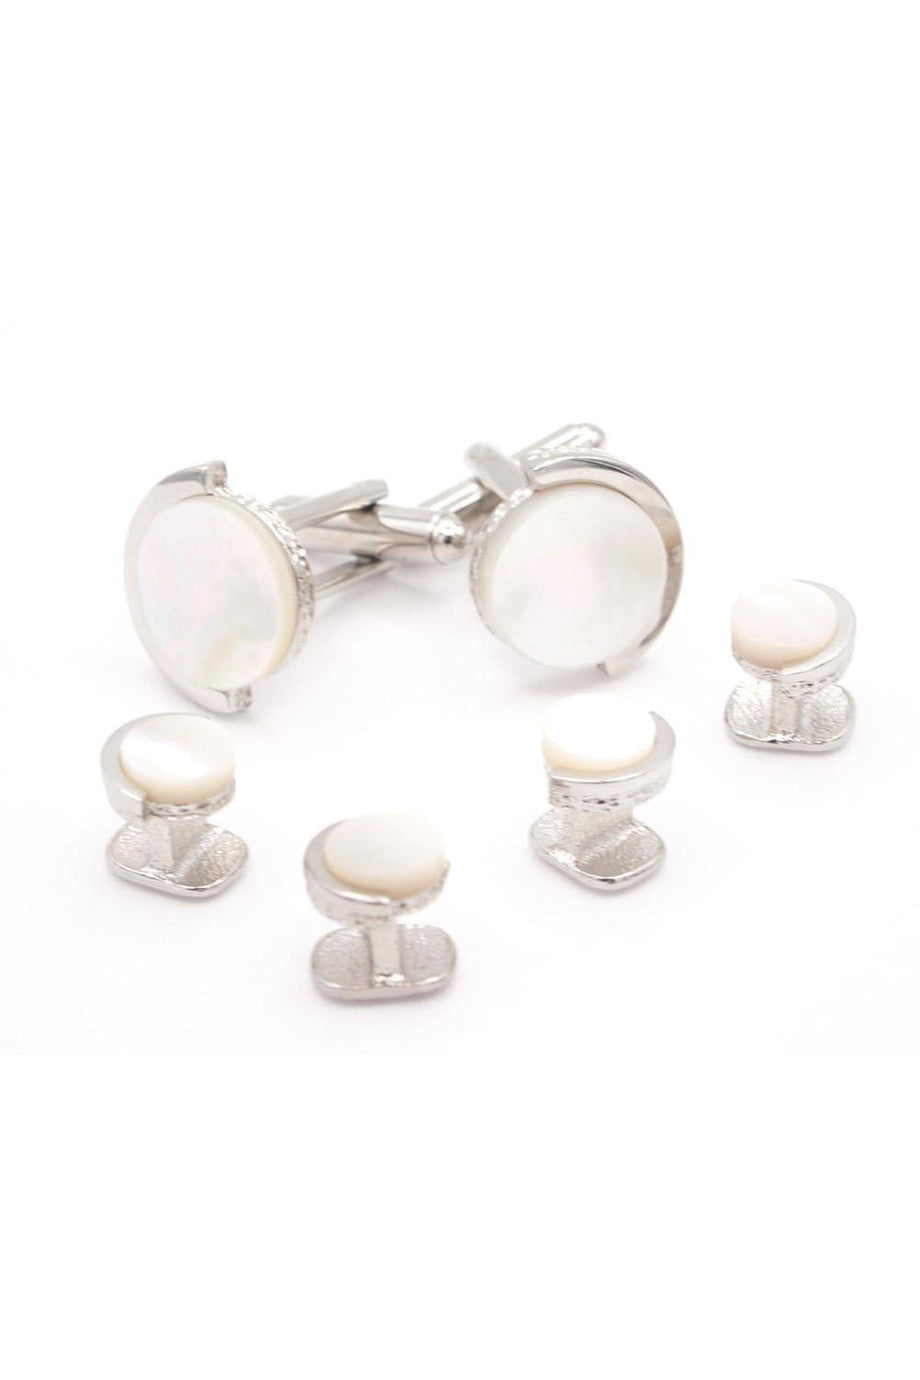 JJ Weston Half Moon Silver Mother of Pearl Studs and Cufflinks Set